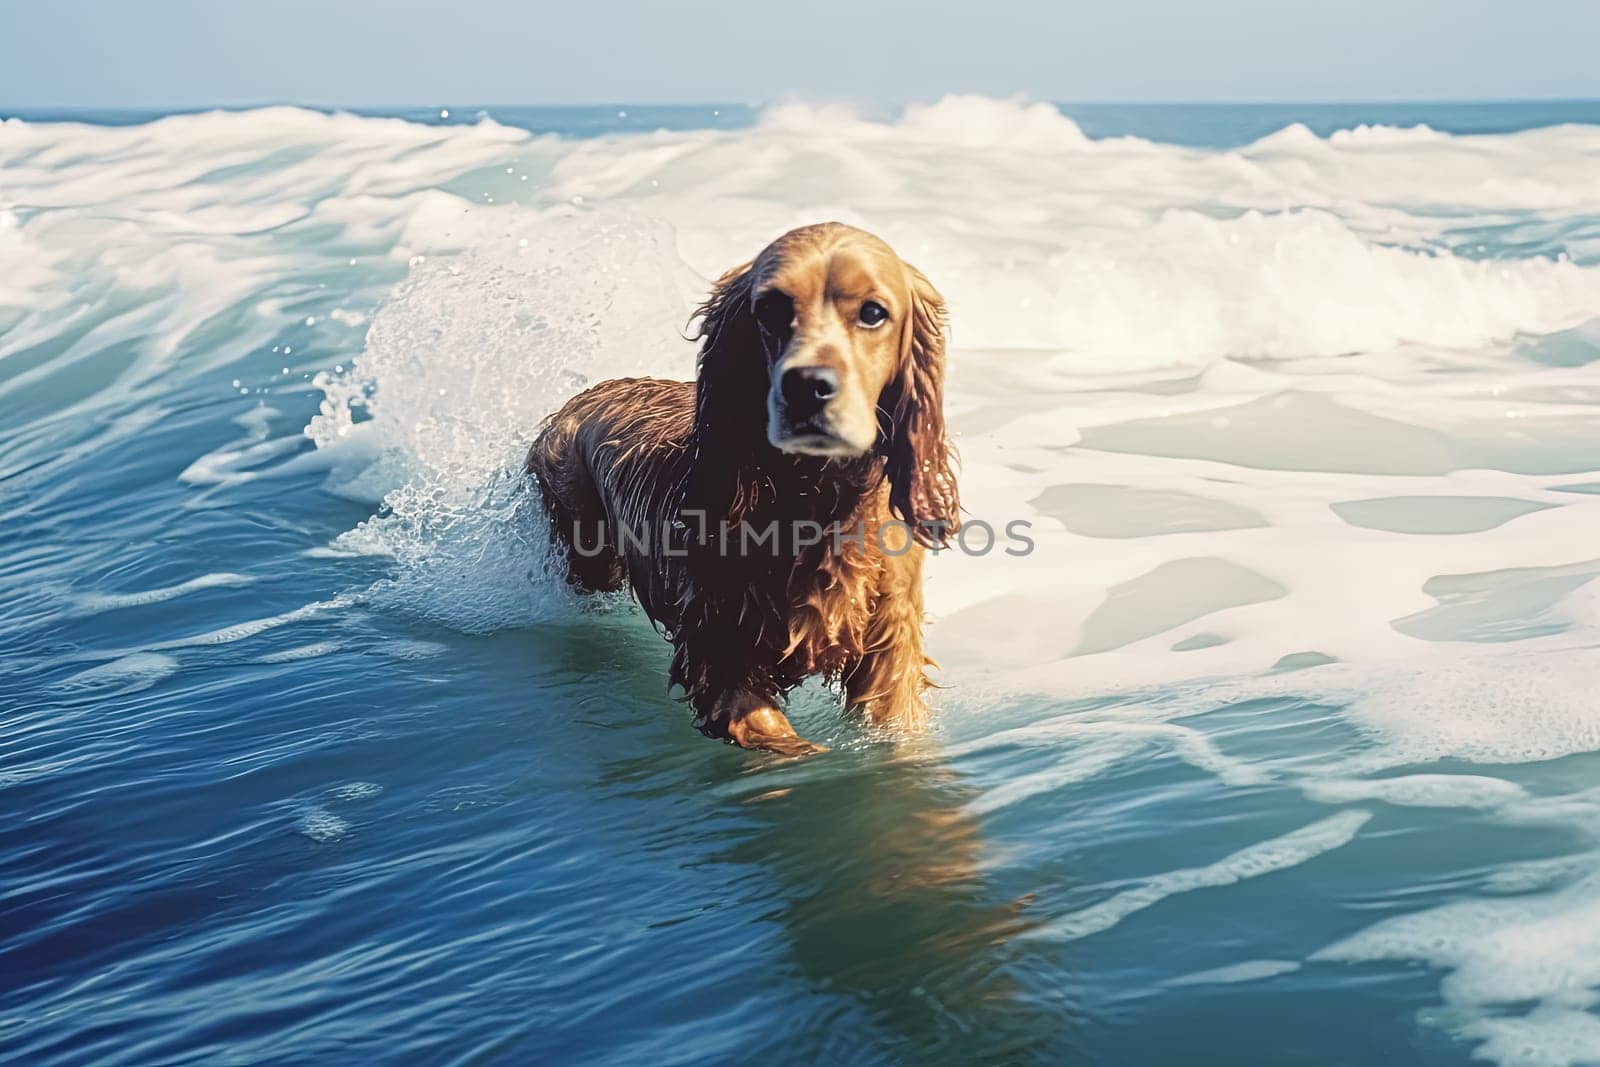 A playful dog splashes and frolics in the water, enjoying a refreshing moment of fun and activity.